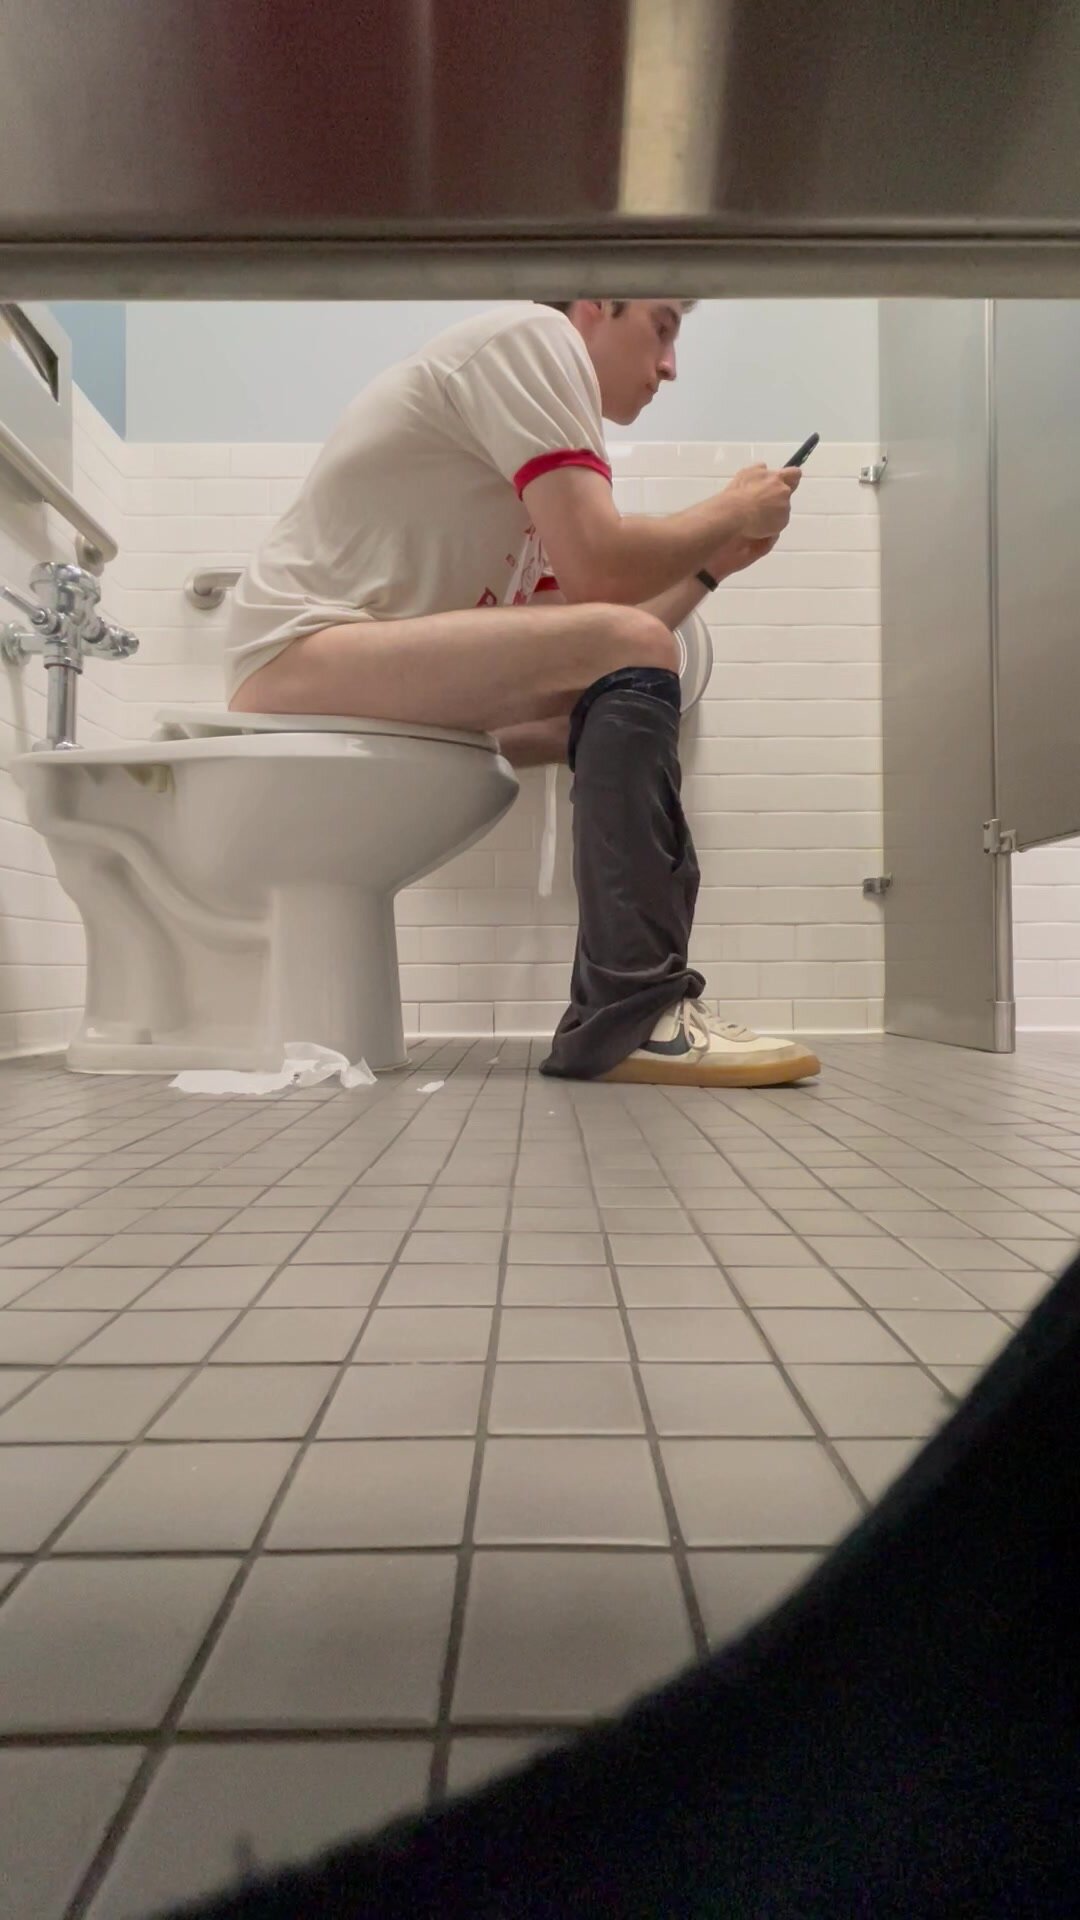 Cute guy sitting on the toilet - video 2